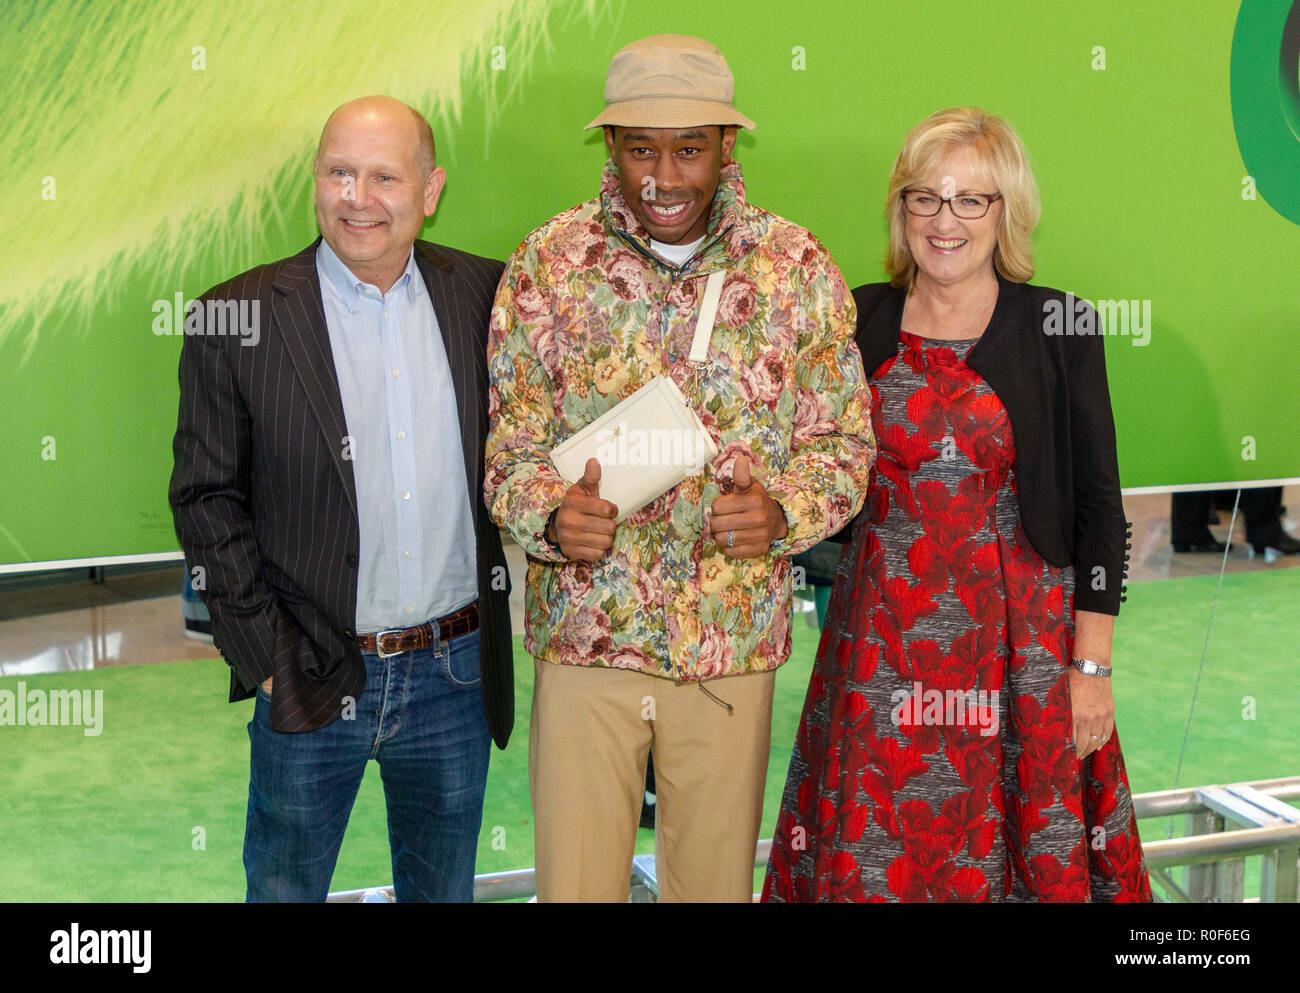 New York, NY, USA. 3rd November, 2018. (L-R) Producer Chris Meledandri, musician Tyler, the Creator,  and producer Janet Healy attend the world premiere of Dr Seuss’s “The Grinch' at Alice Tully Hall in New York City on November 3, 2018. Credit: Jeremy Burke/Alamy Live News Stock Photo